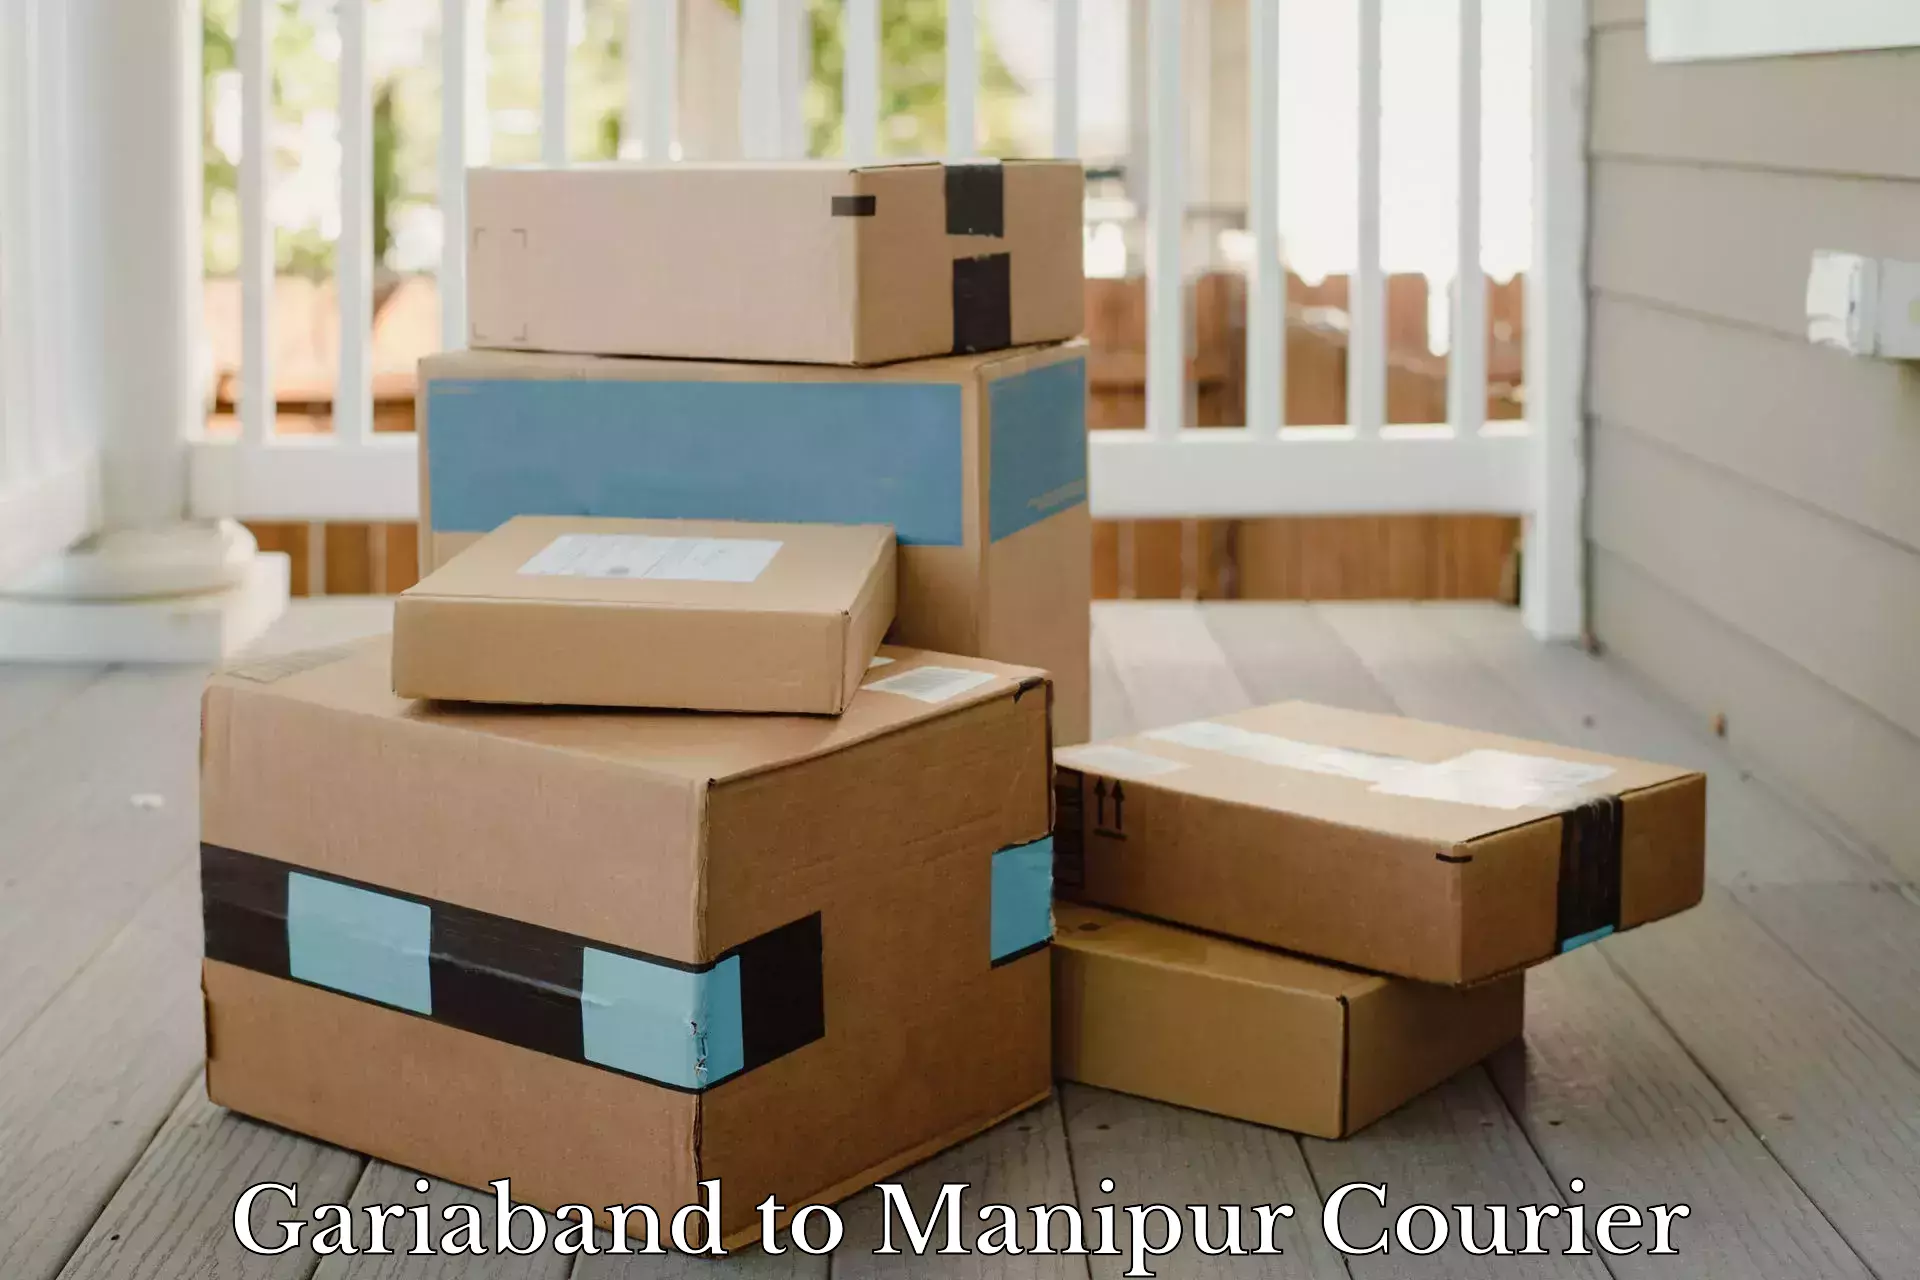 Automated shipping processes Gariaband to Manipur